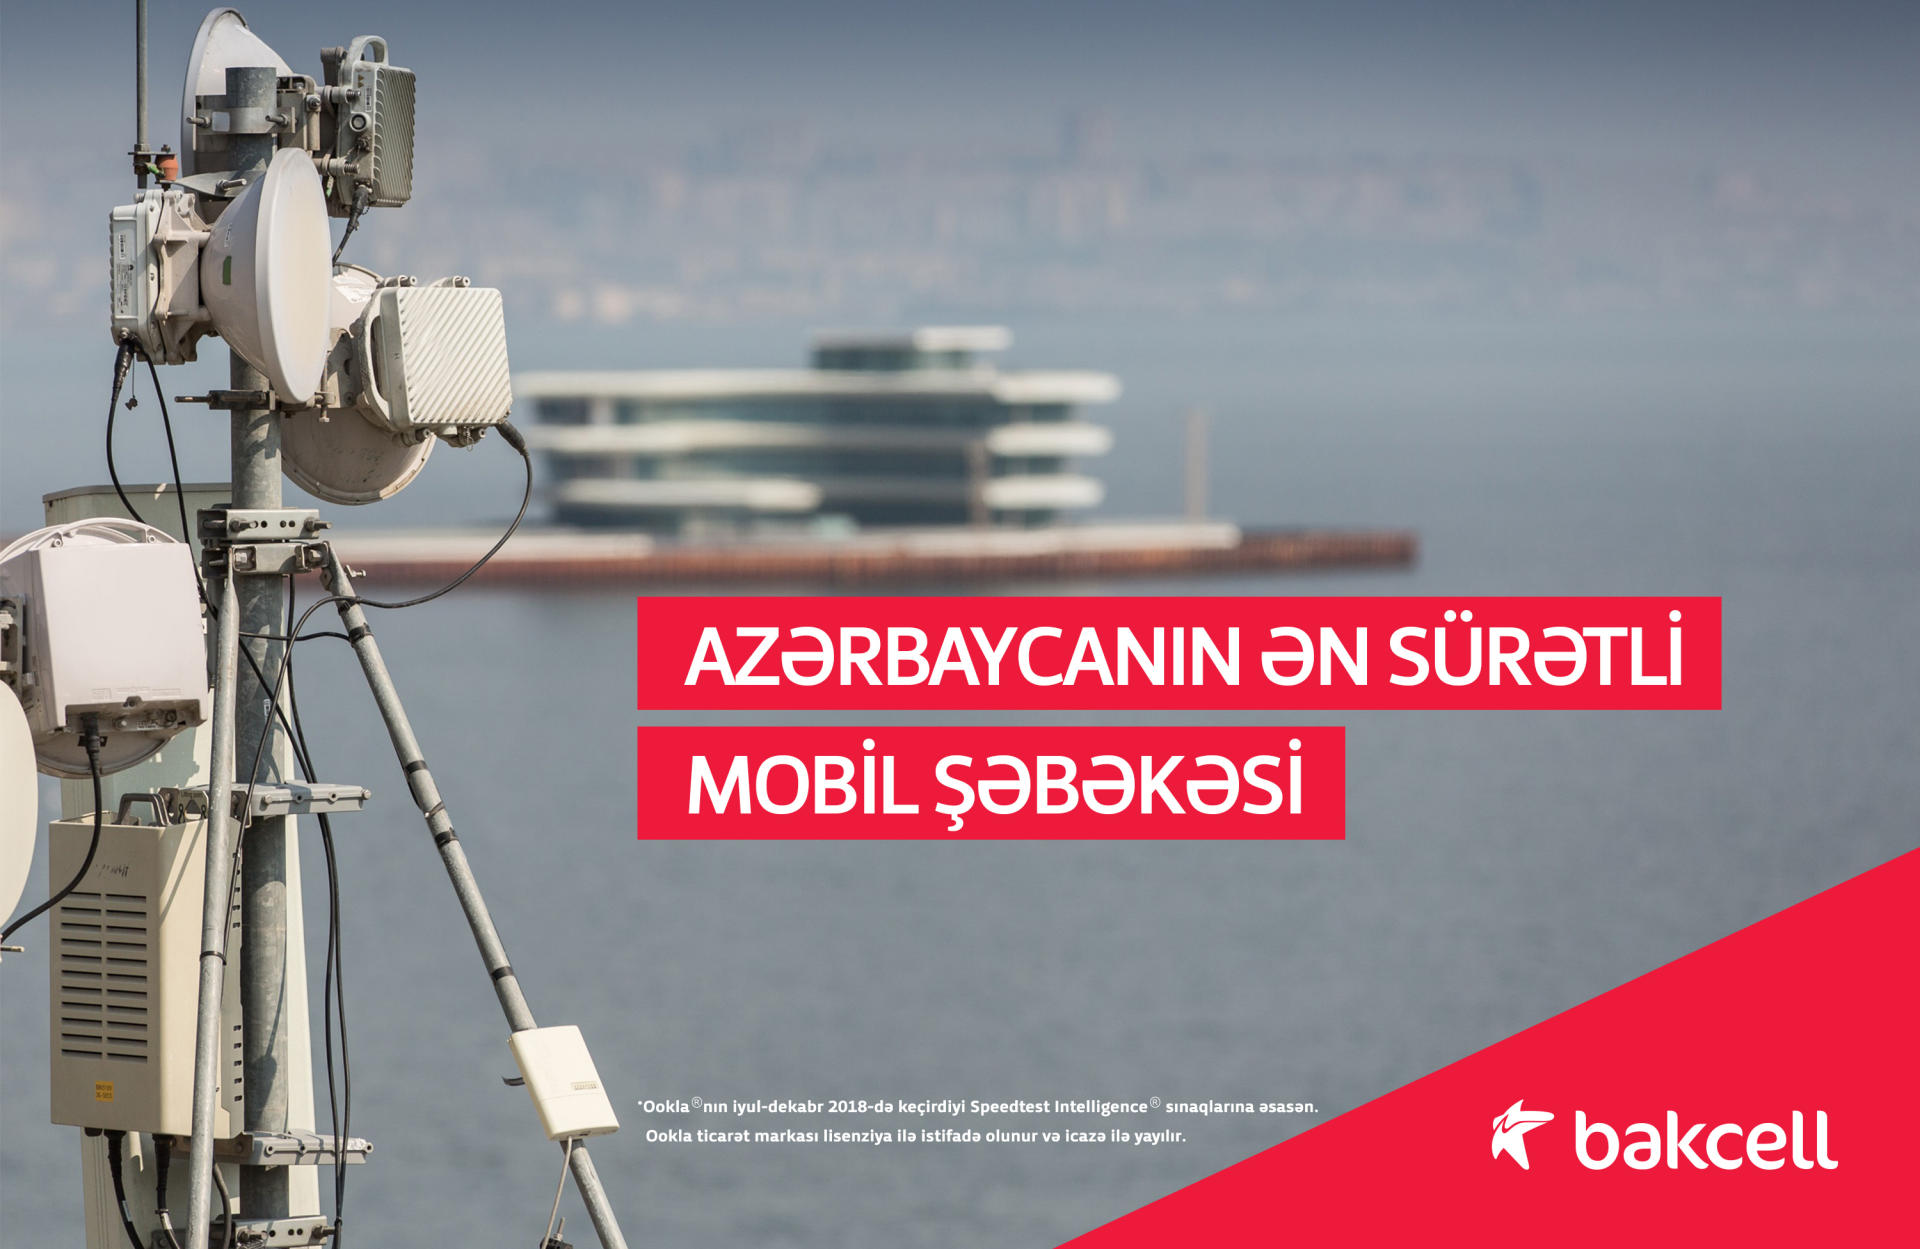 Bakcell implements fastest & largest LTE rollout in Azerbaijan